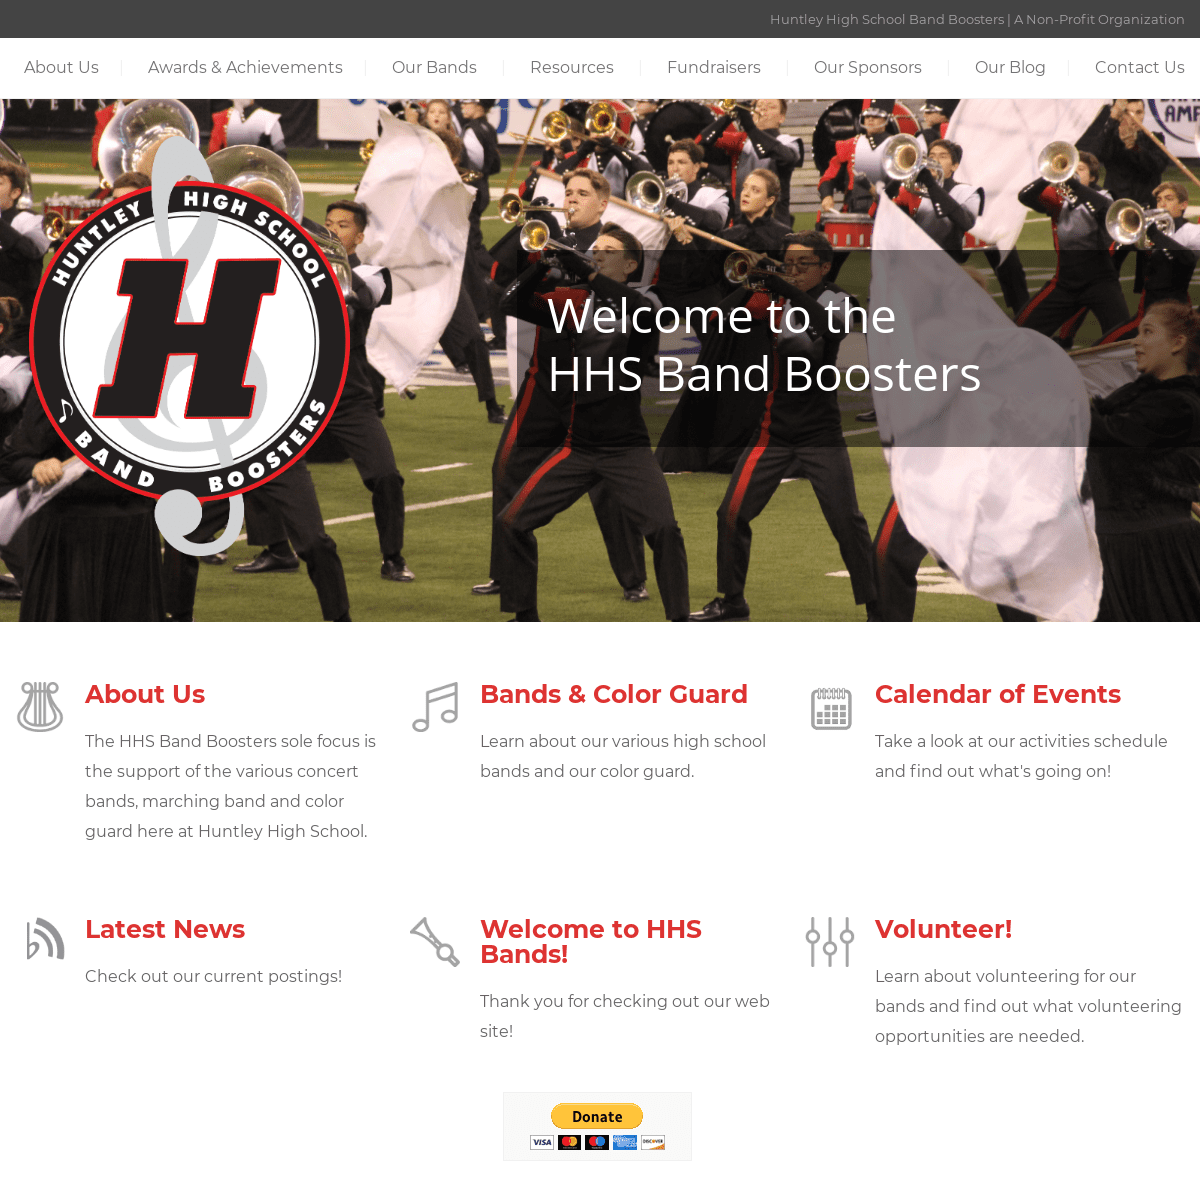 Huntley High School Band Boosters – A Not-For-Profit Organization